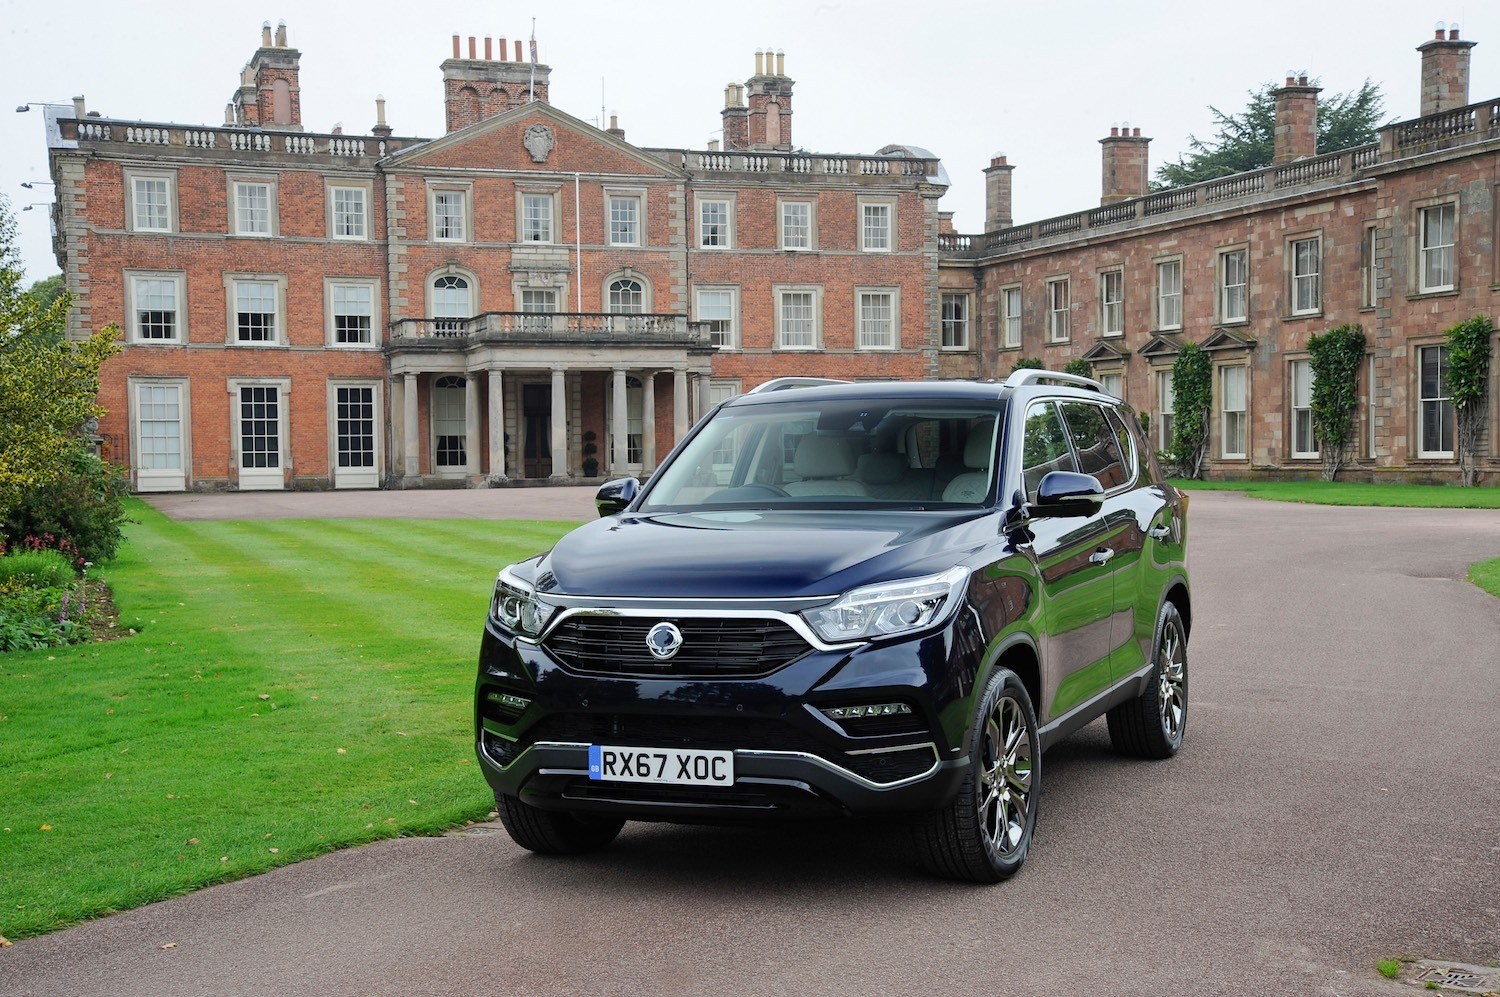 Tom Scanlan reviews the All-New SsangYong Rexton Ultimate 4×4 for Drive 3